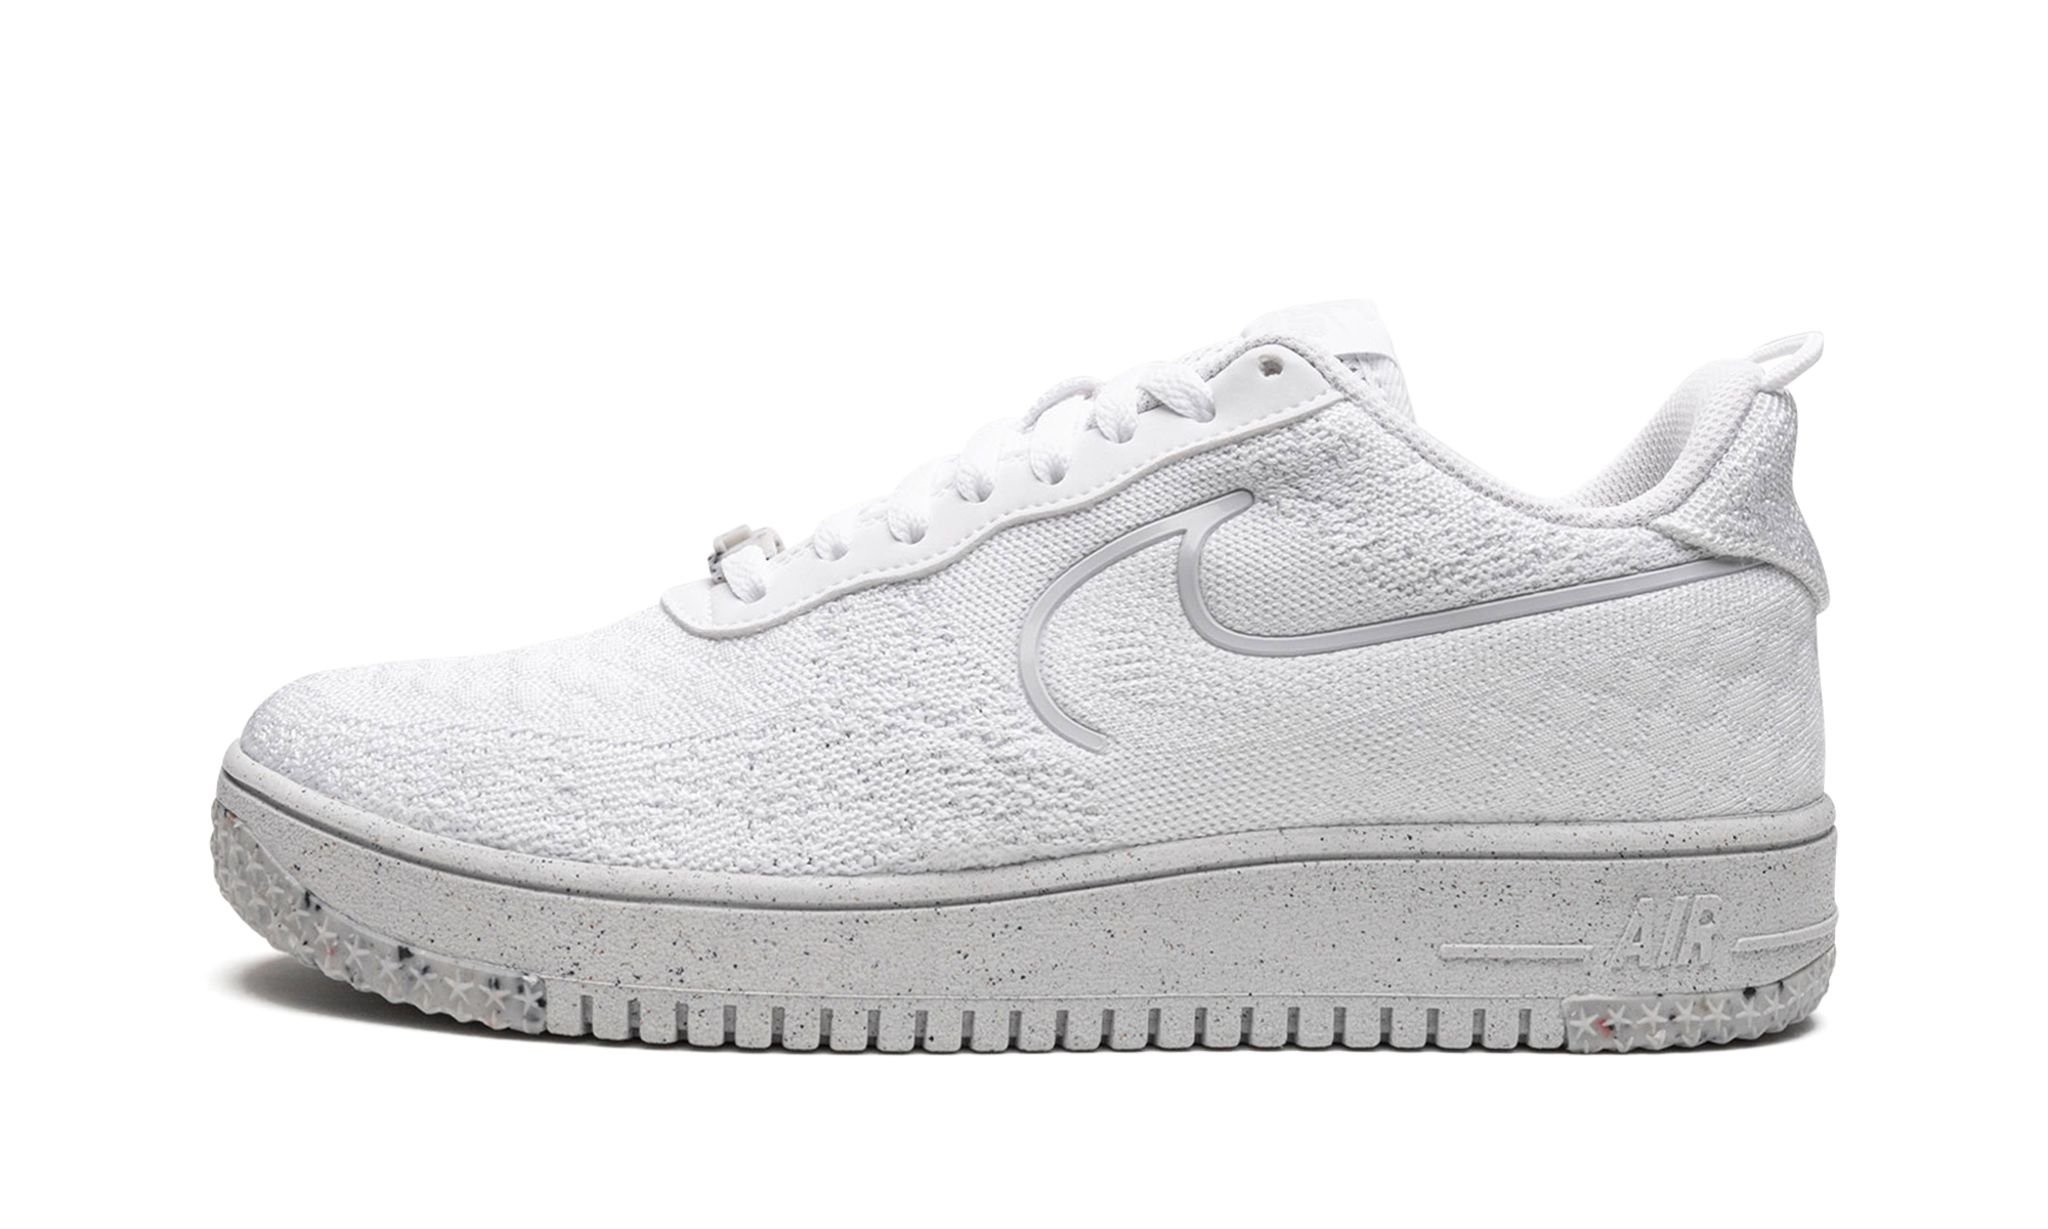 AF1 CRATER FLYKNIT NN "Whiteout" - 1